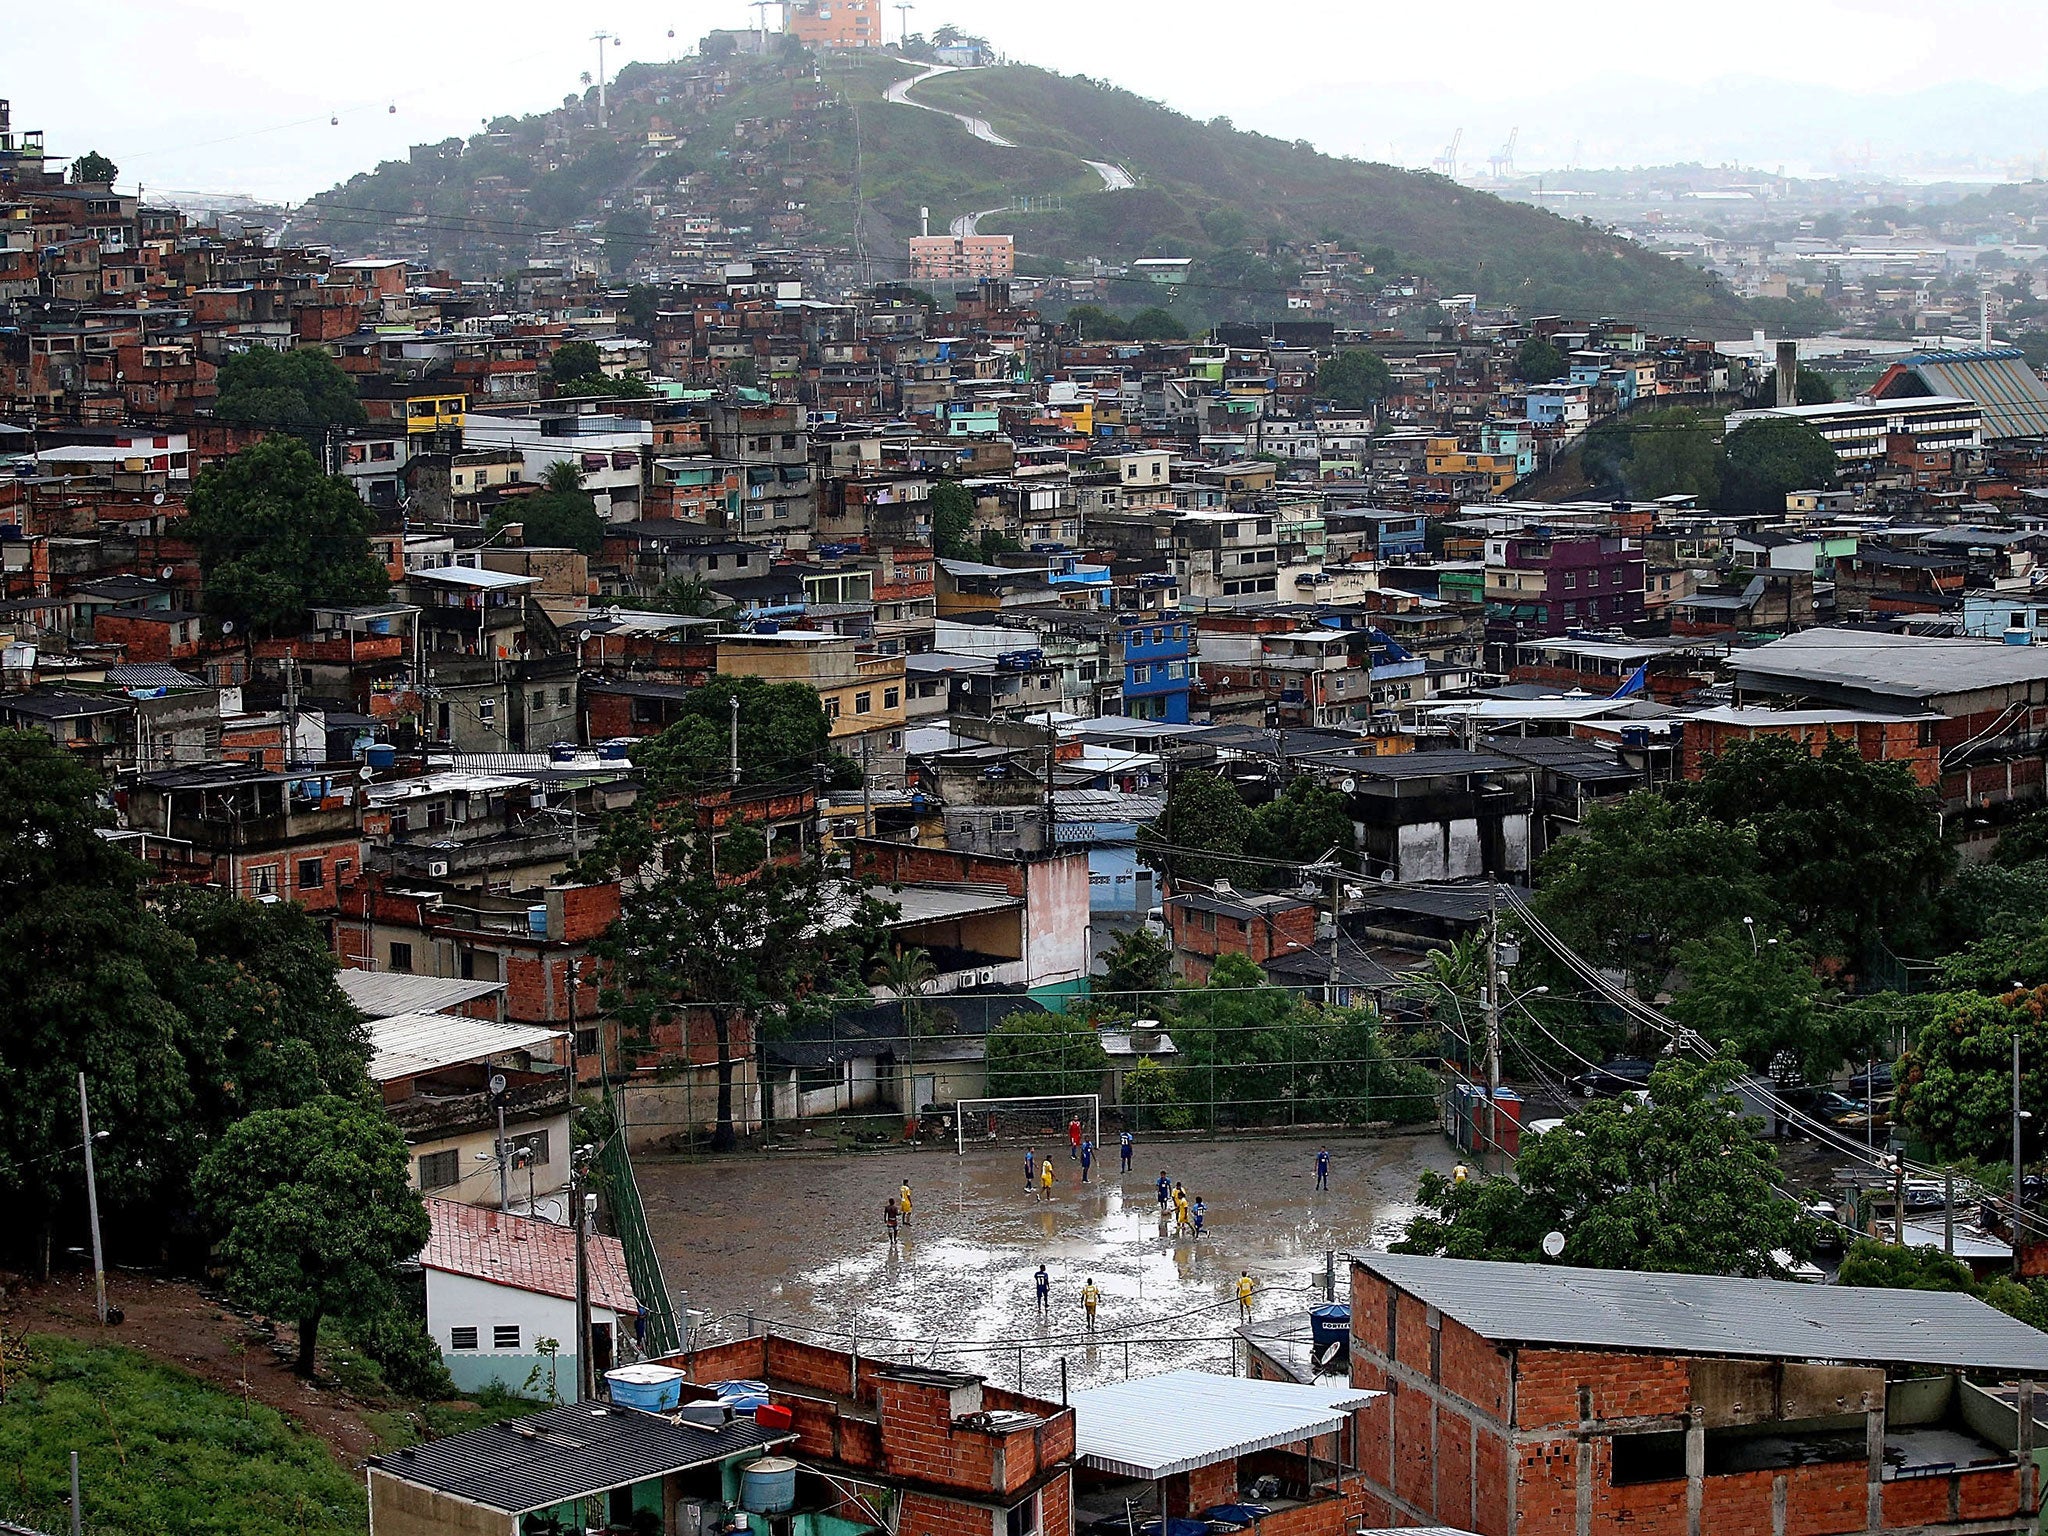 Could This Favela Be The Blueprint For How Our Cities Should Look